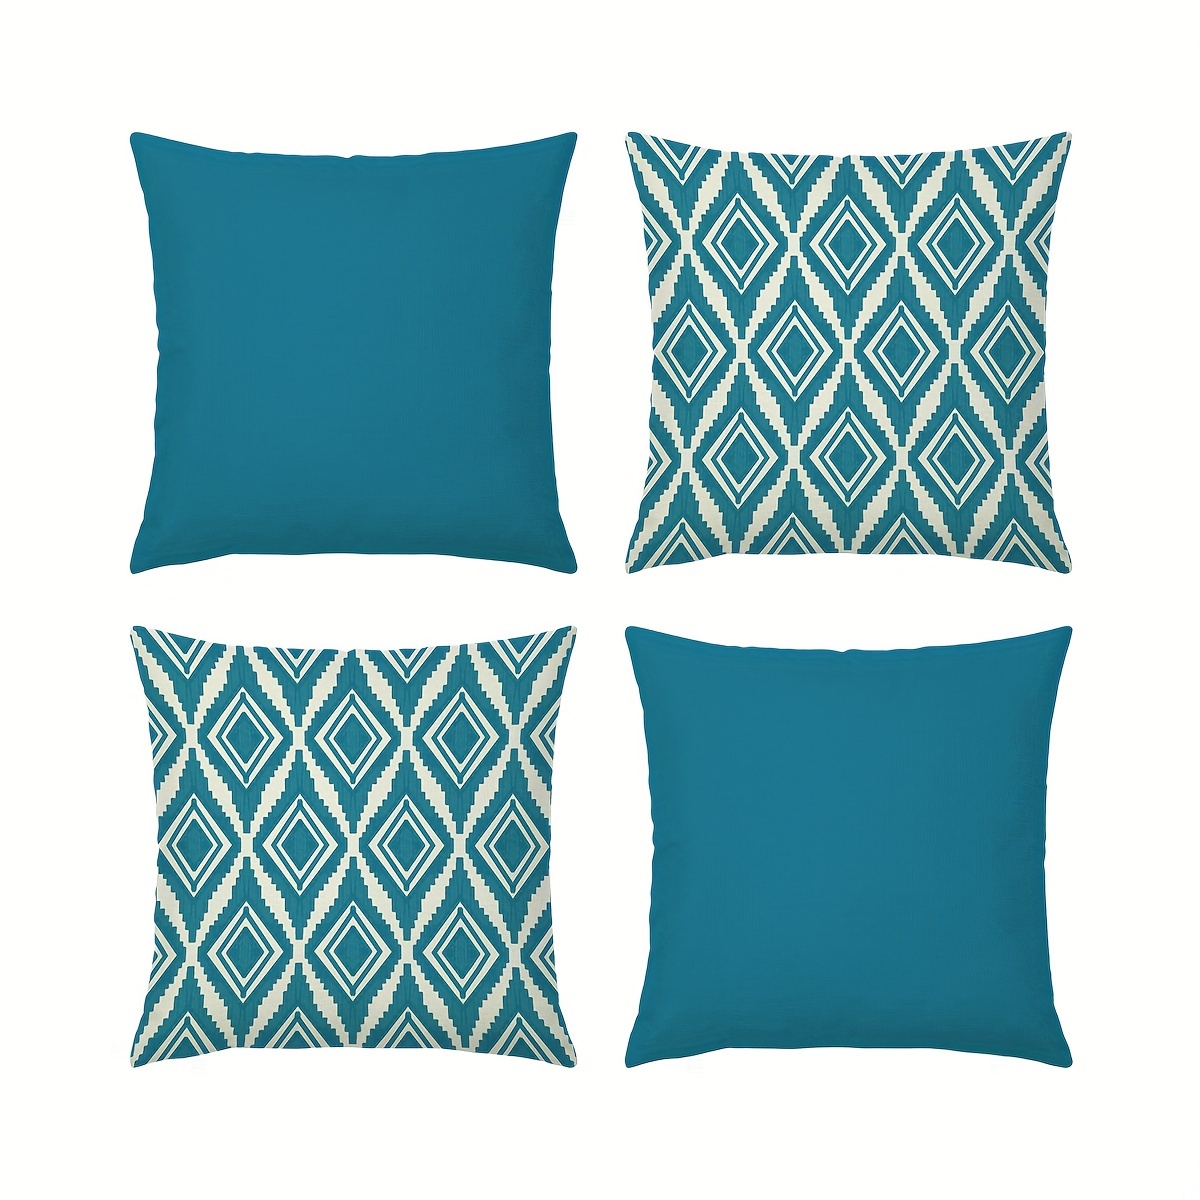 

4pcs Suige Decorative Throw Pillow Covers Set Of 4 Geometric Design Linen Cushion Cover For Couch Sofa Living Room, 18"x18" Inches, Aqua Blue